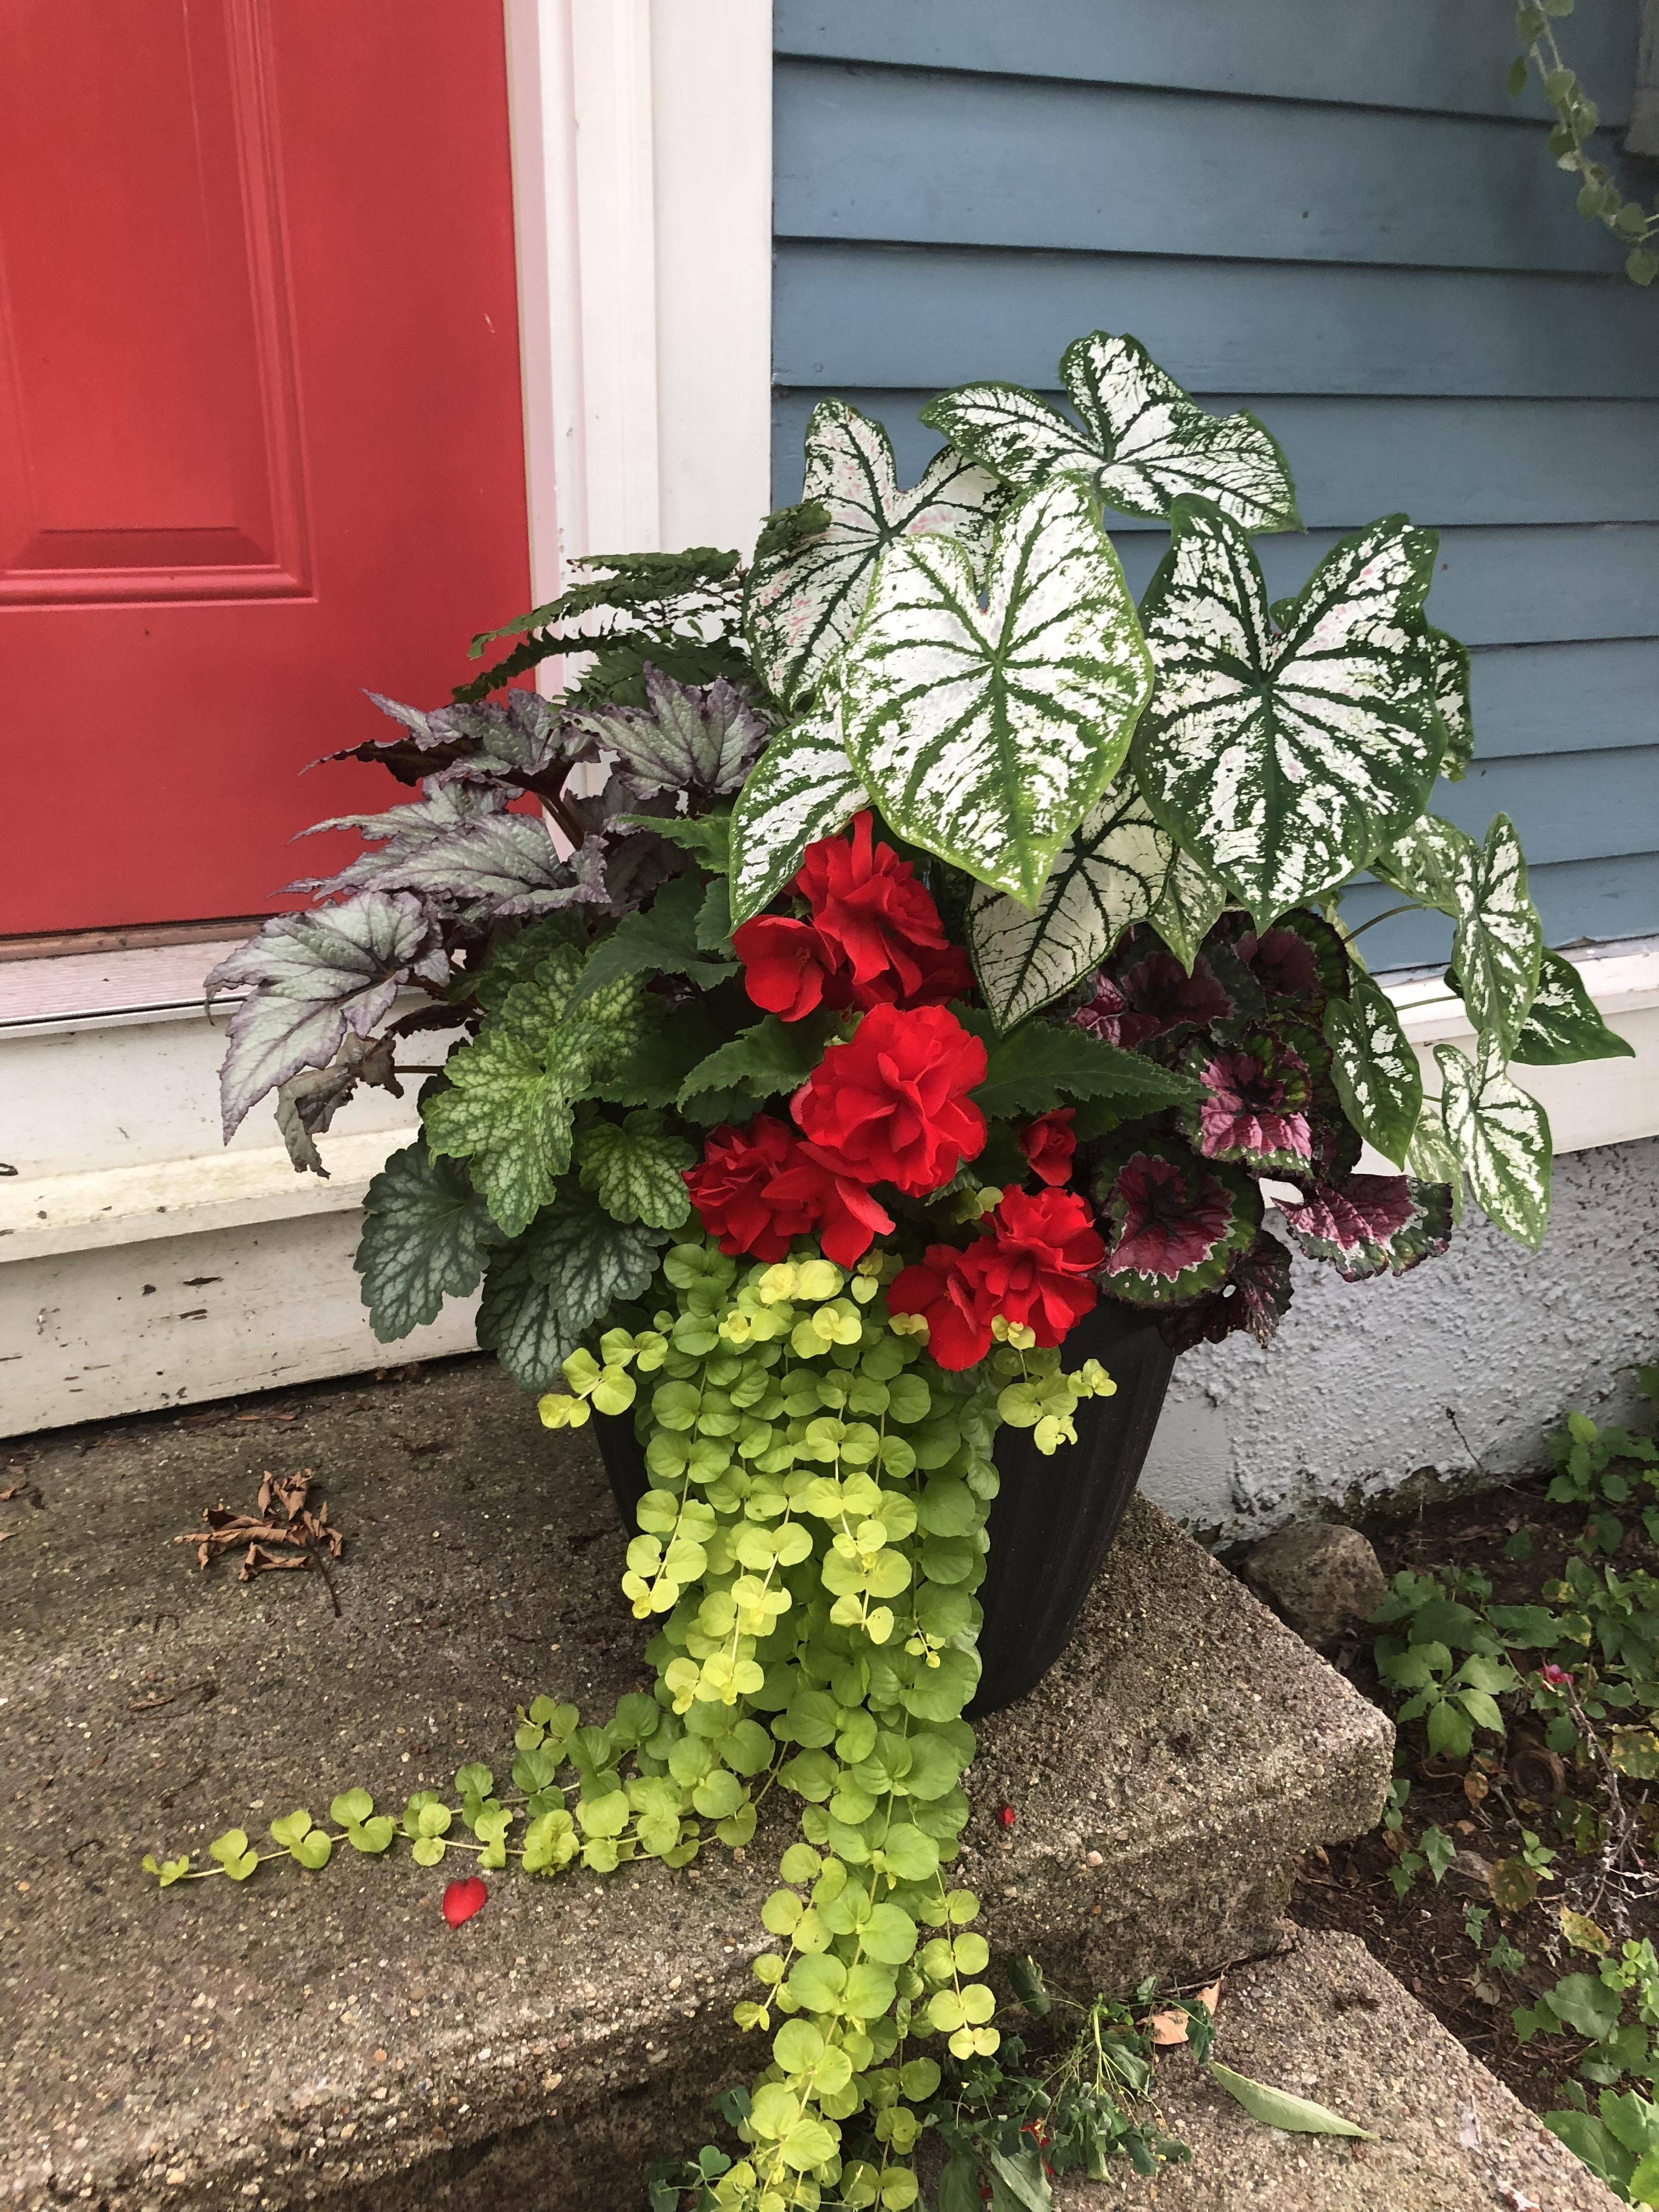 Container Gardening Flowers